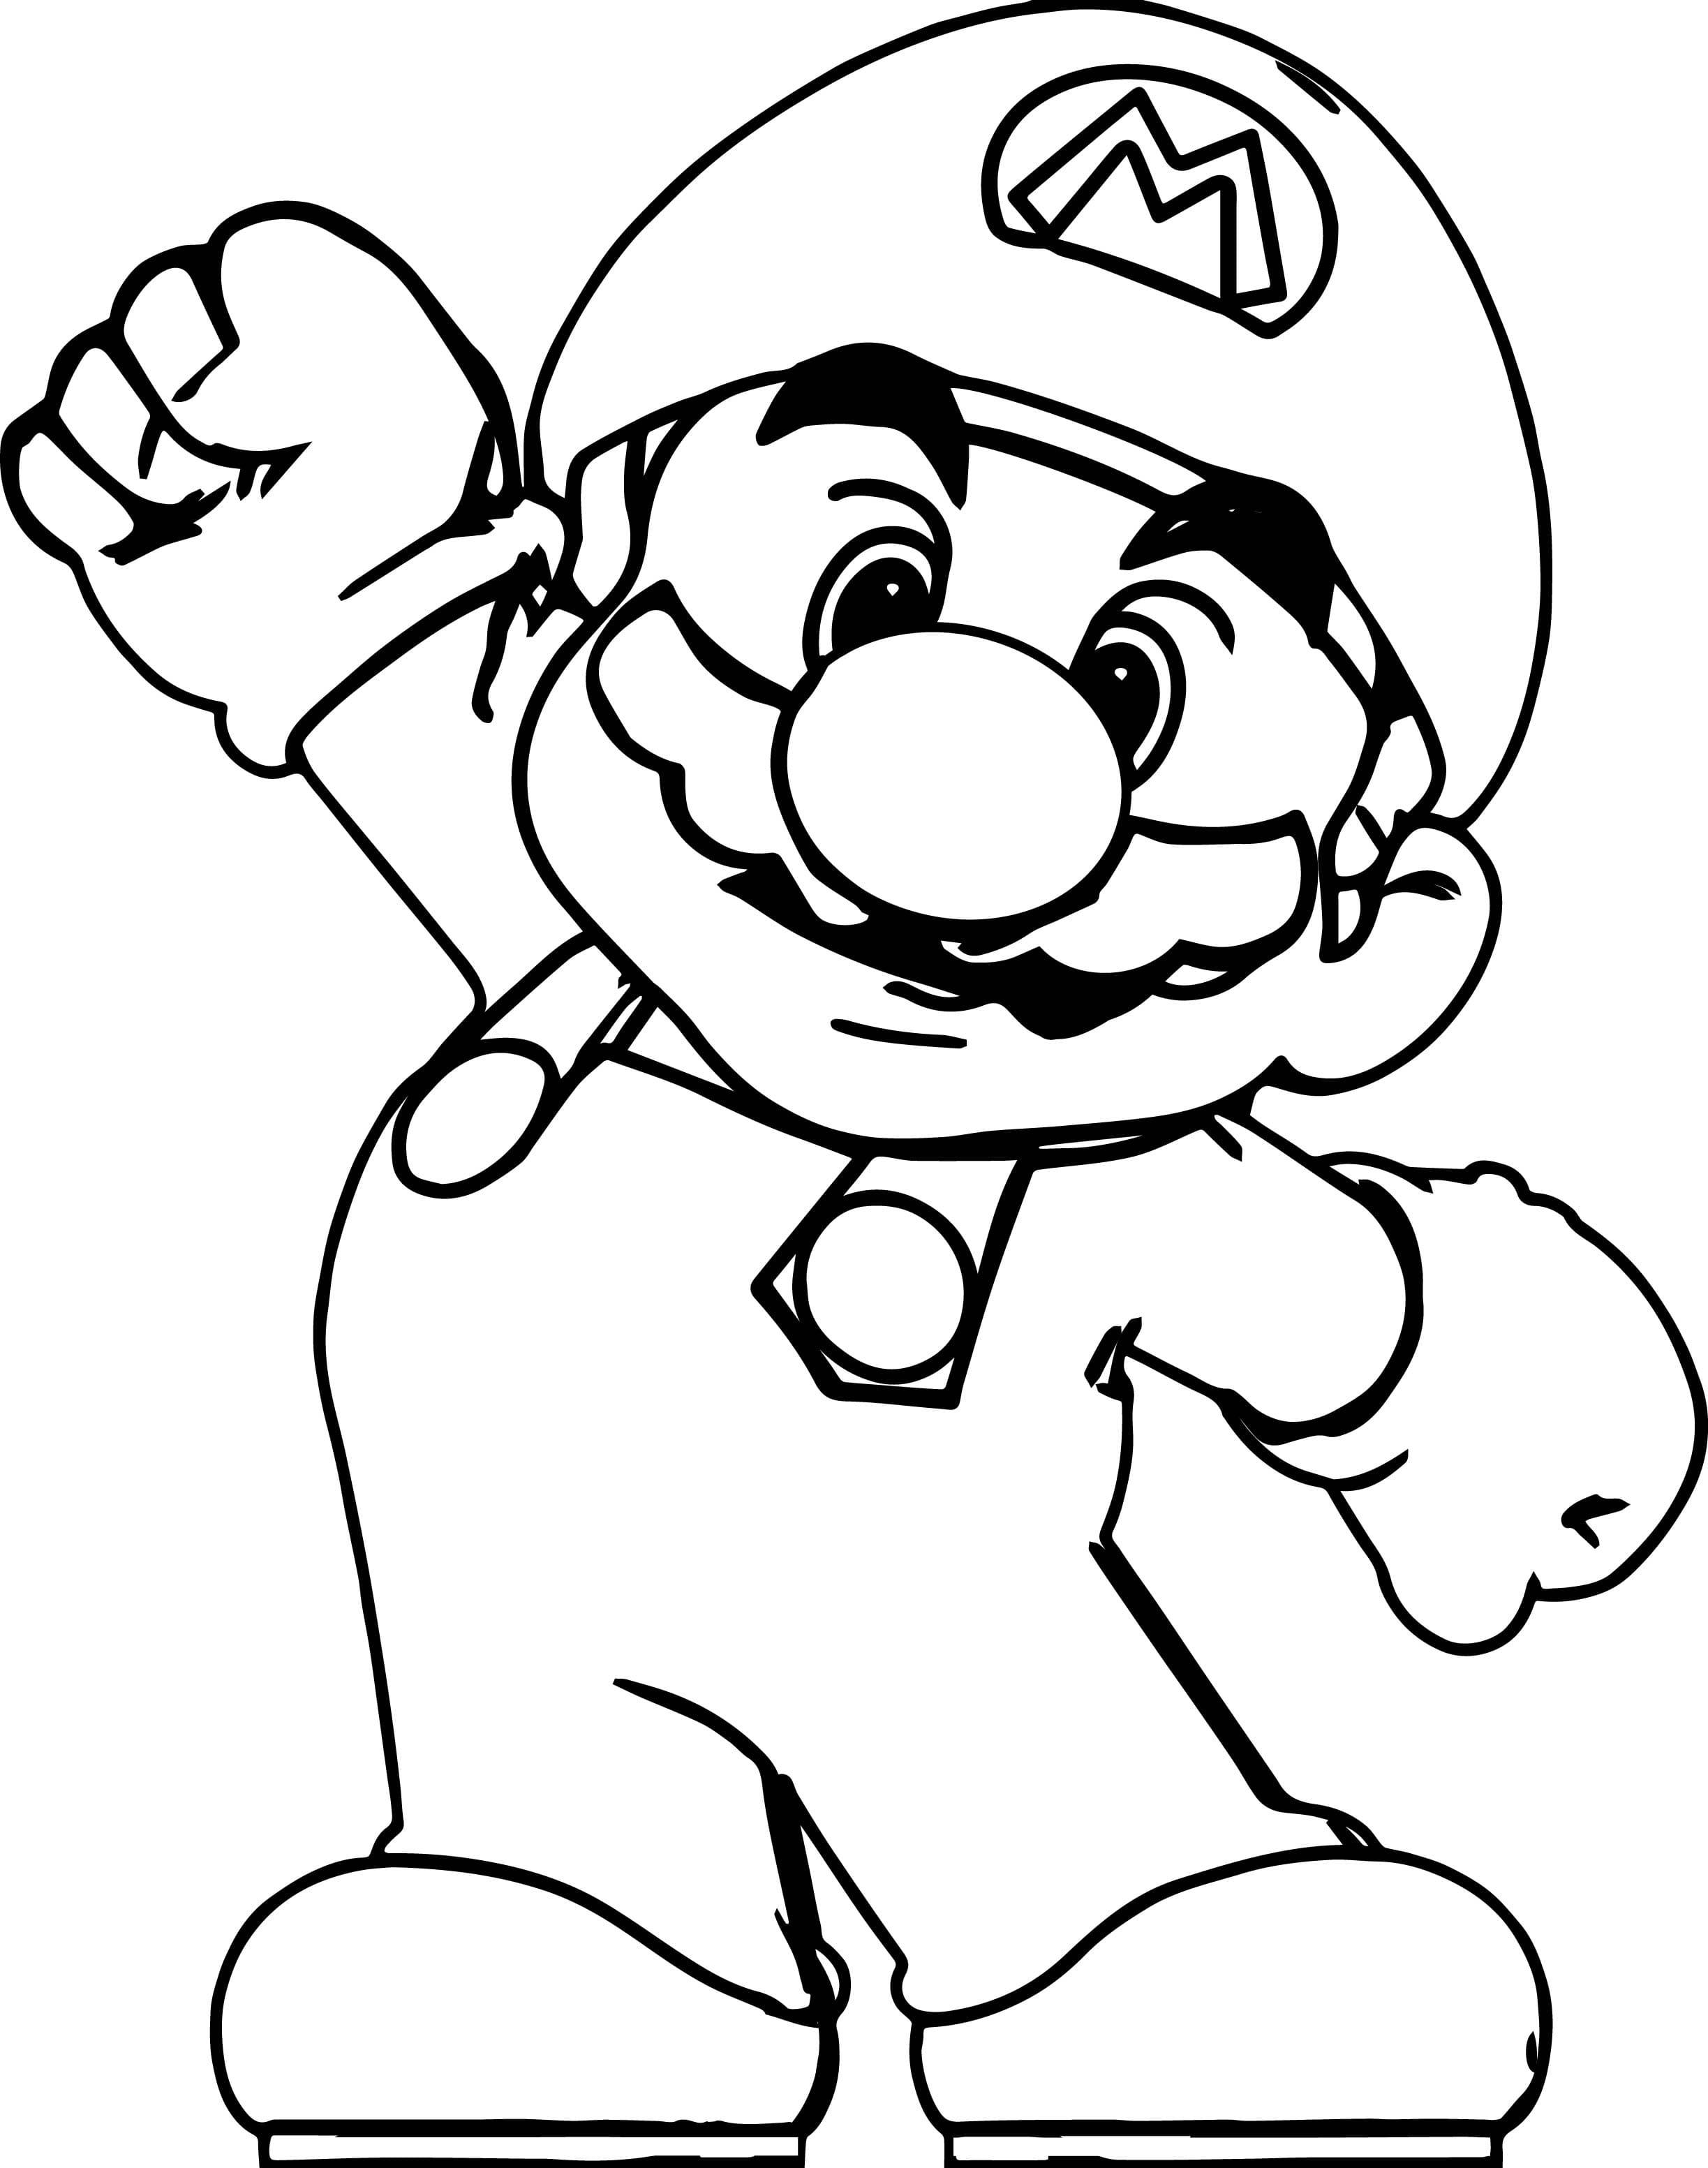 Super Mario 04  coloring page to print and coloring